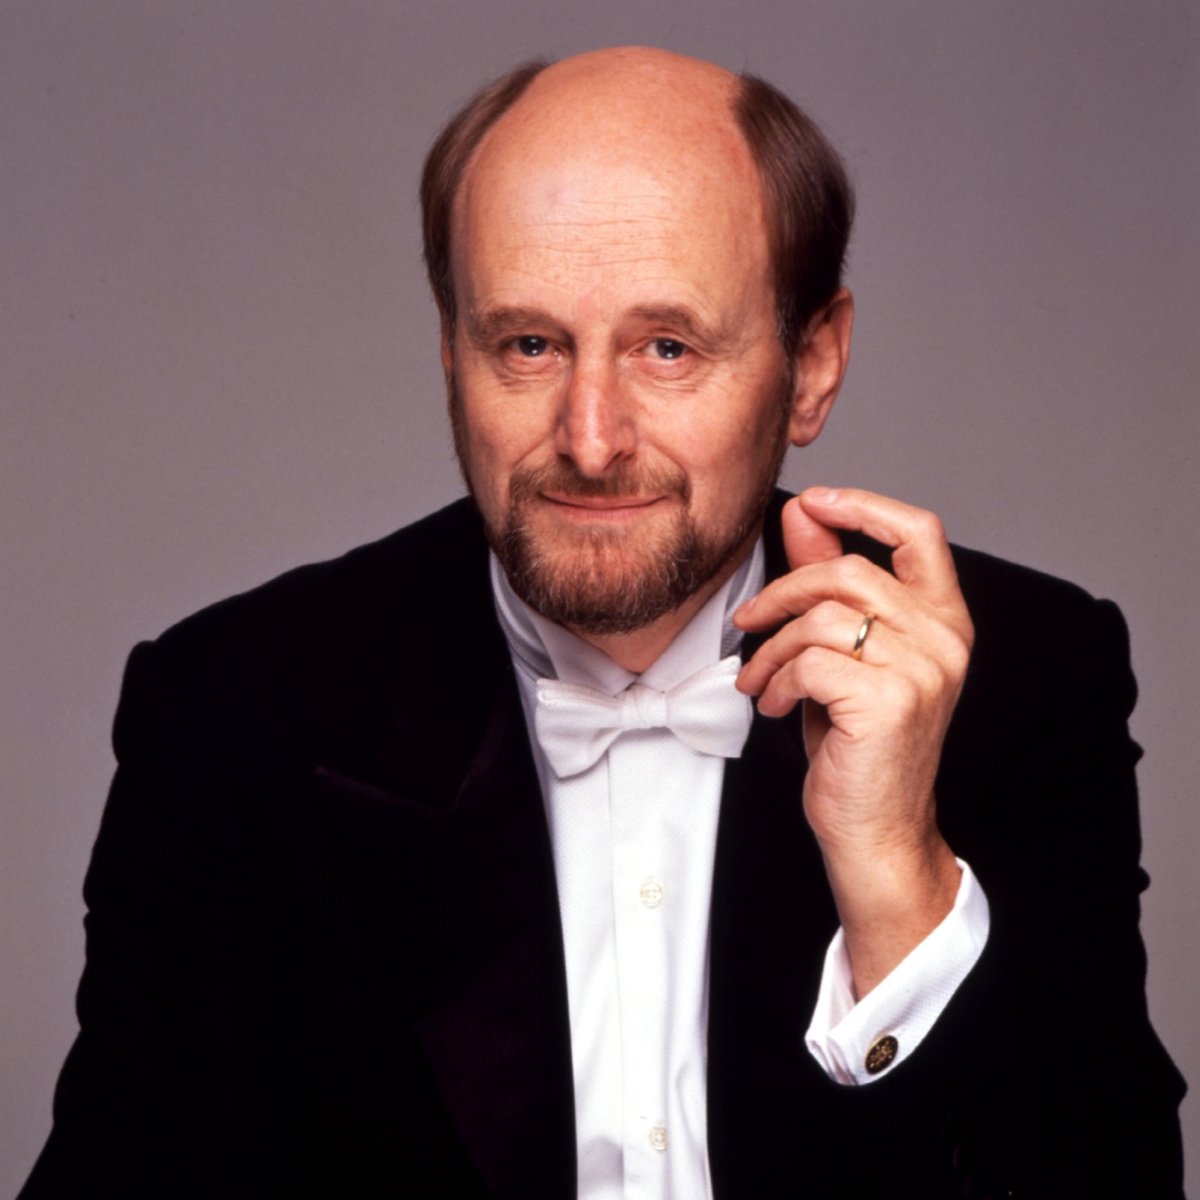 In the 1980s, Sir Roger Norrington and his period-instrument orchestra The London Classical Players recorded Beethoven's symphonies with a historically informed approach. The recordings went on to receive critical acclaim 🌟 Discover his Erato recordings: w.lnk.to/rneTW